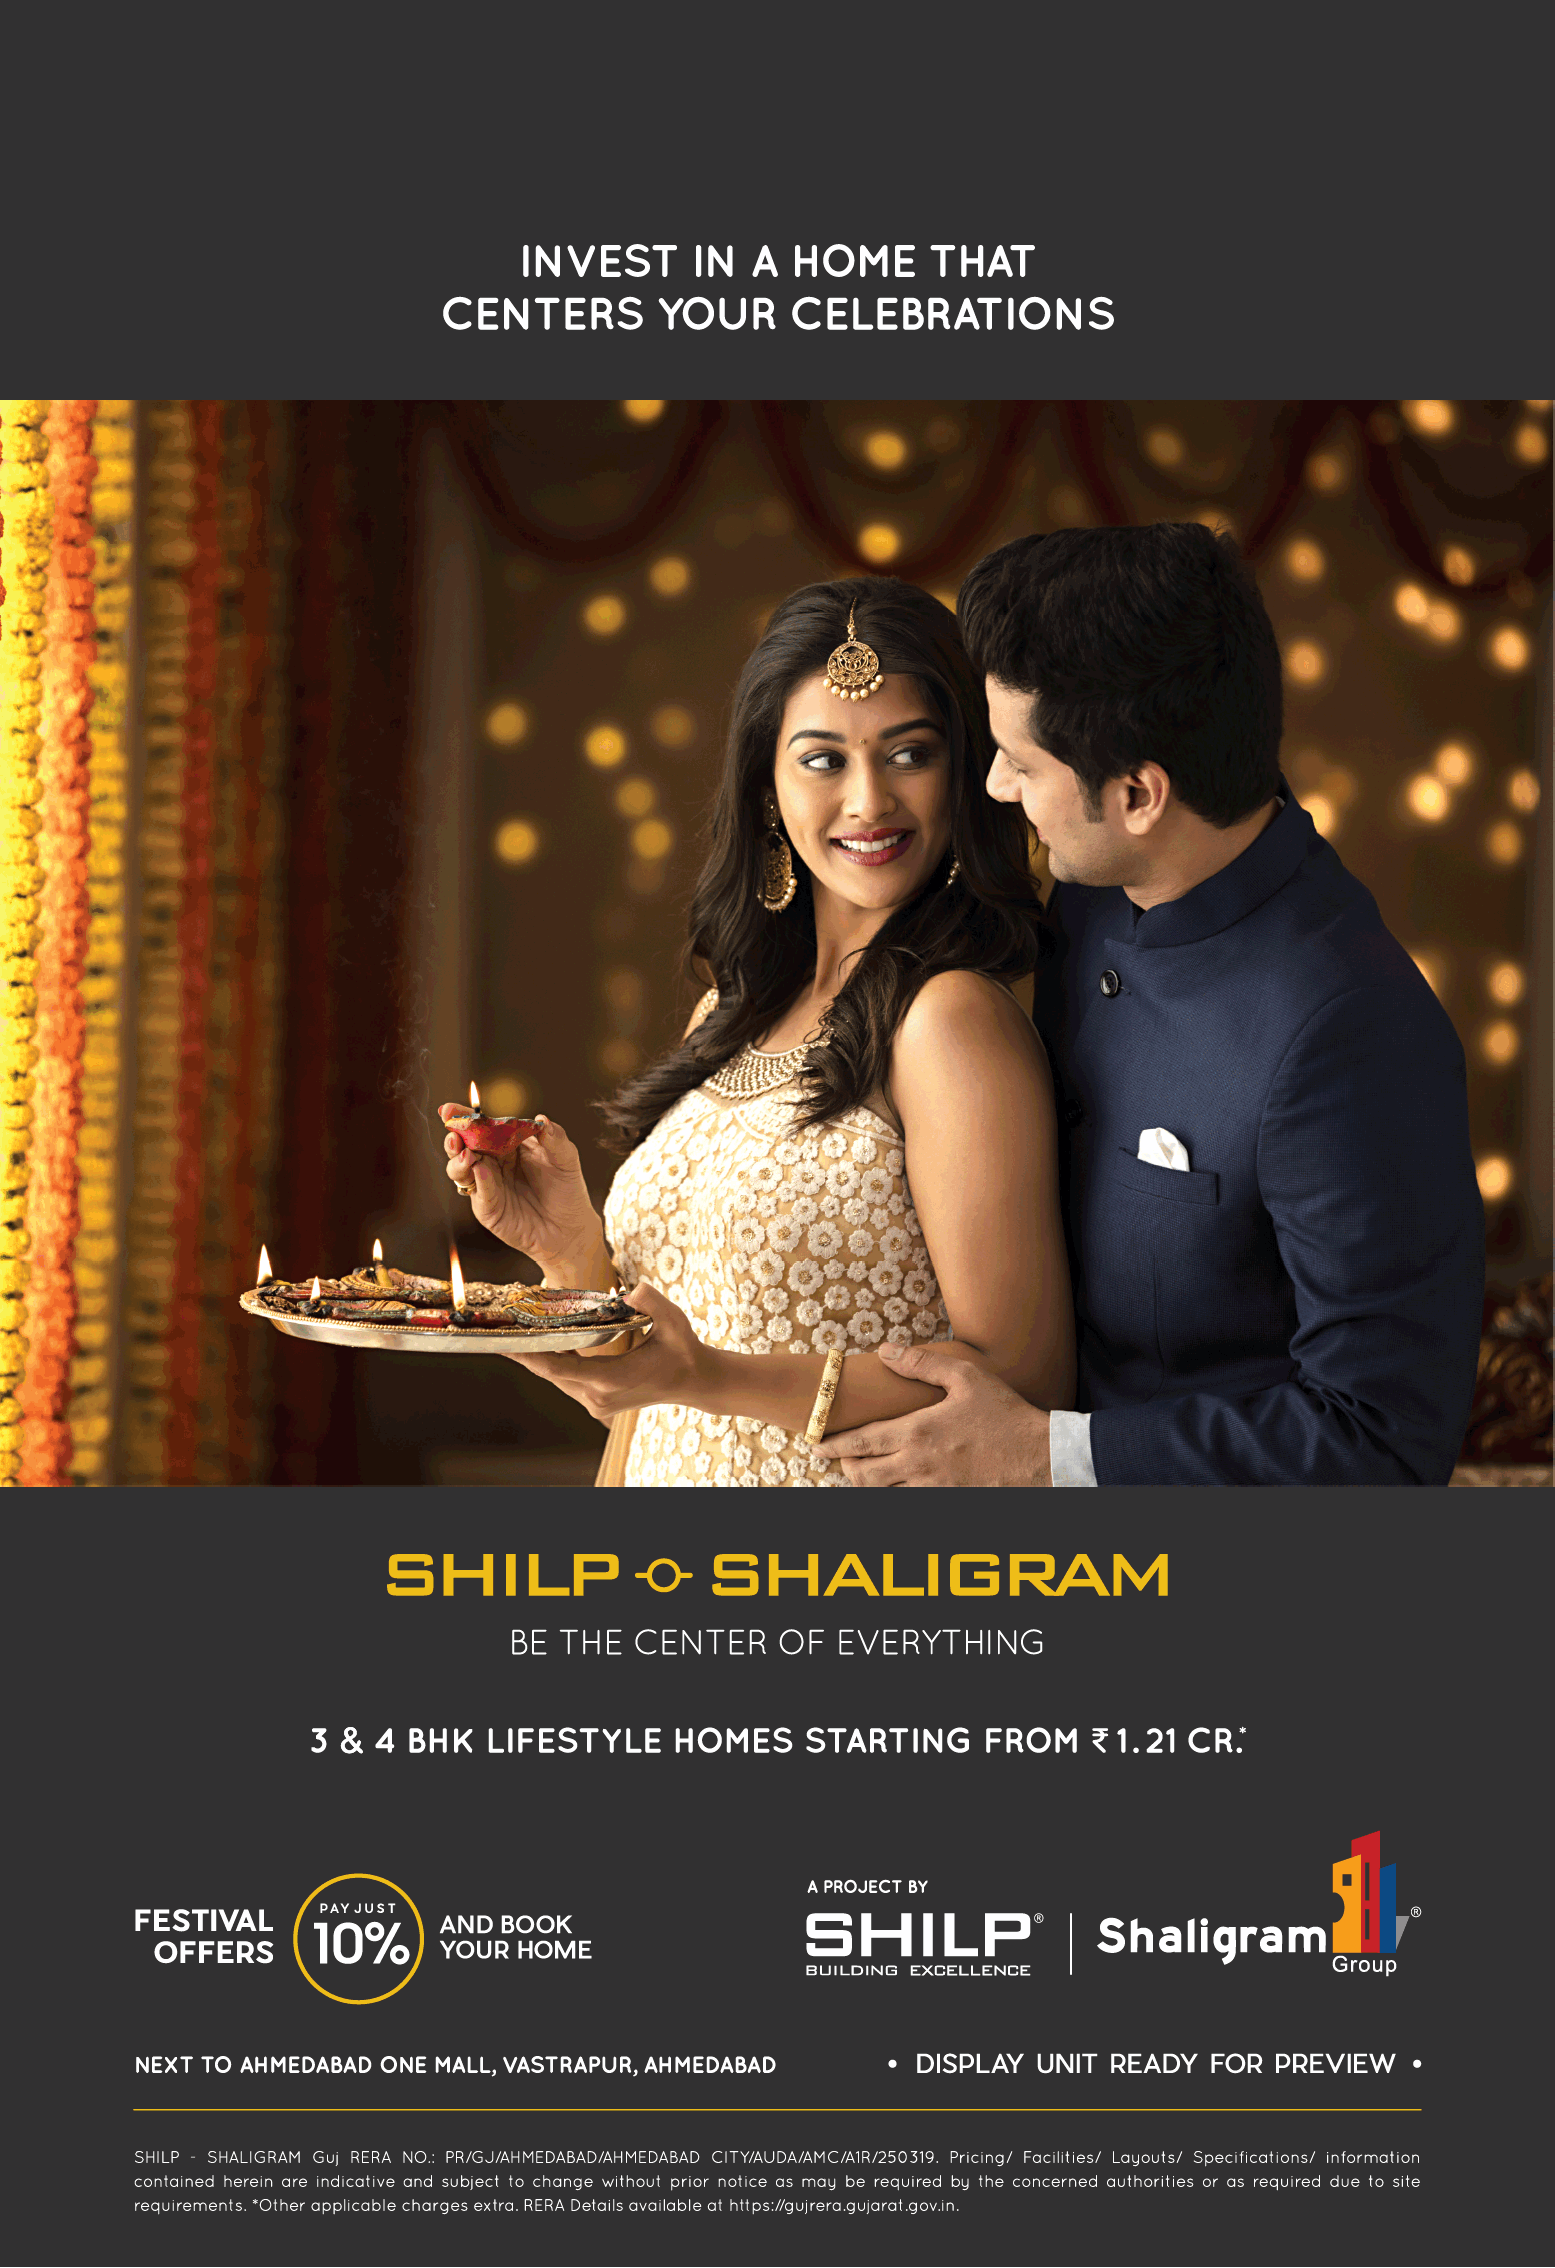 Book 3/4 BHK lifestyle homes Rs 1.21 Cr at Shilp Shaligram in Ahmedabad Update